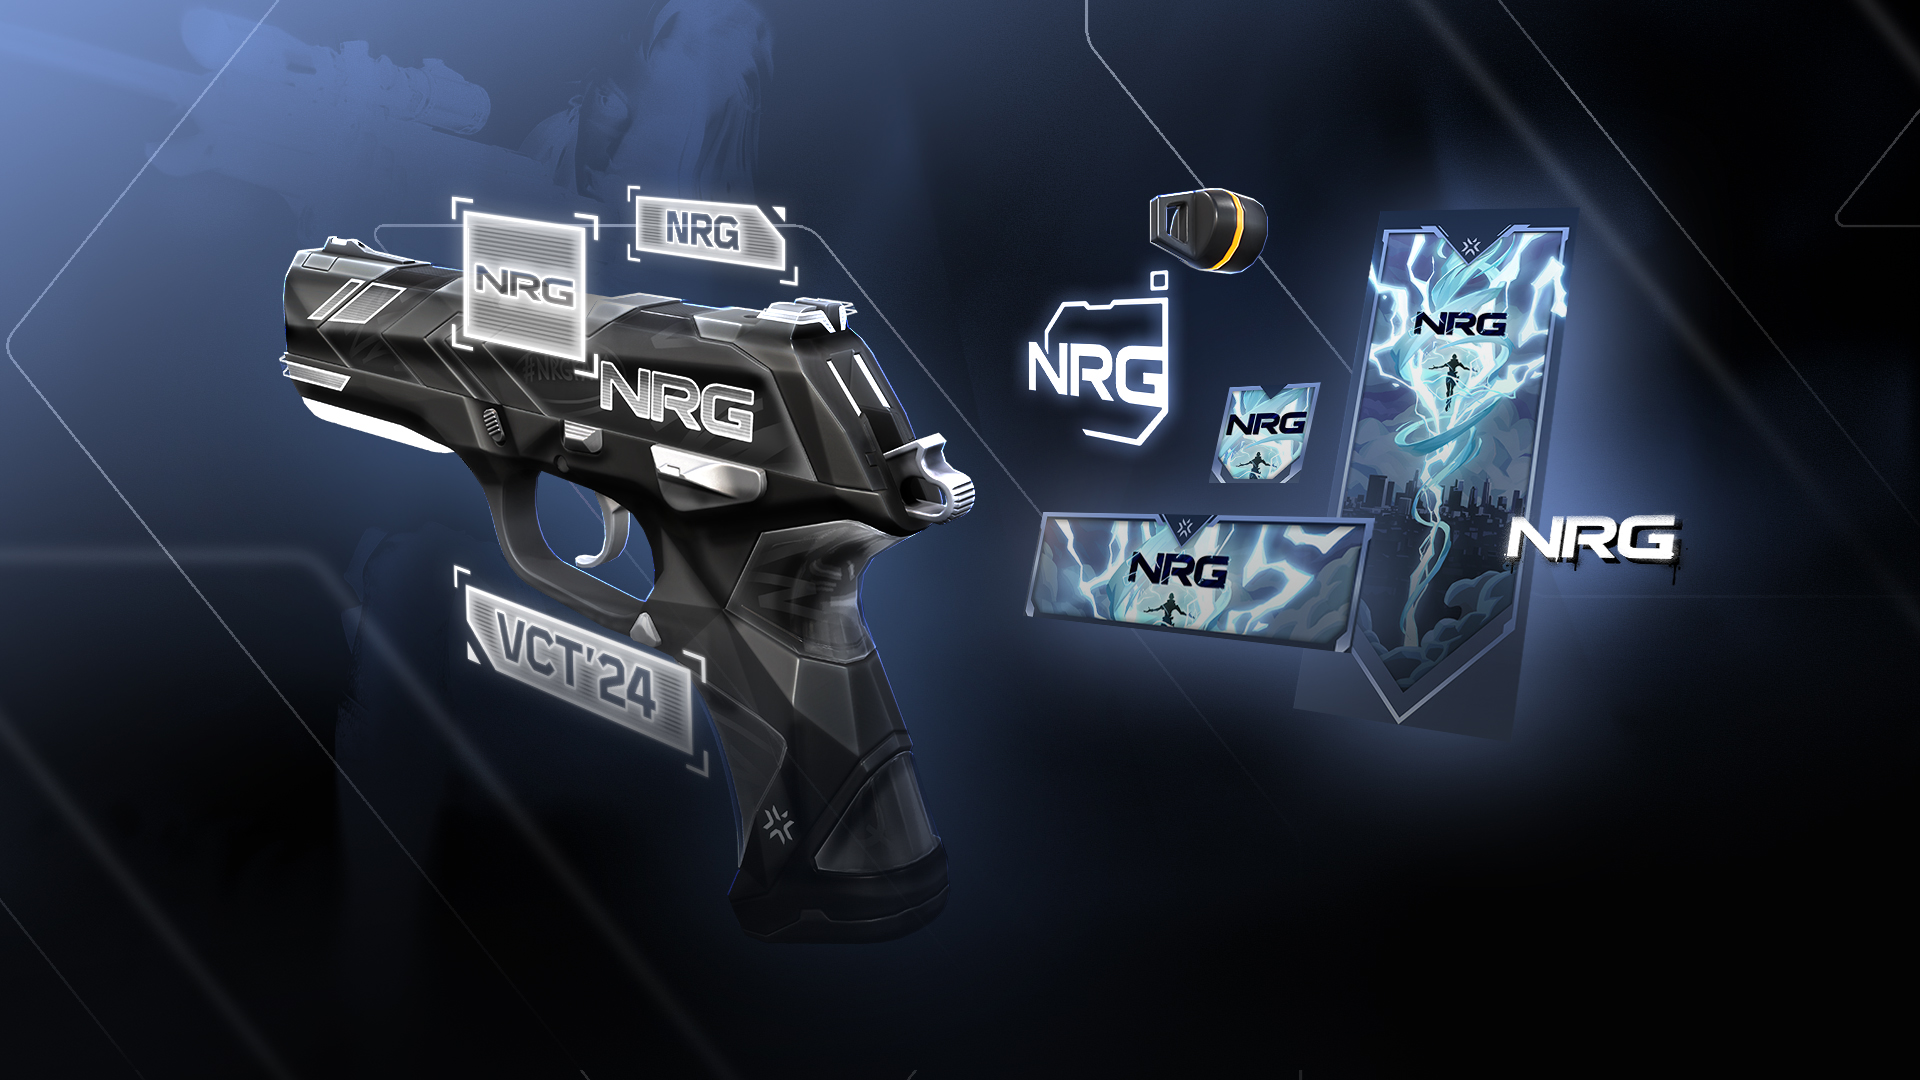 NRG VCT Team Capsule. (Image Credits: Riot Games)